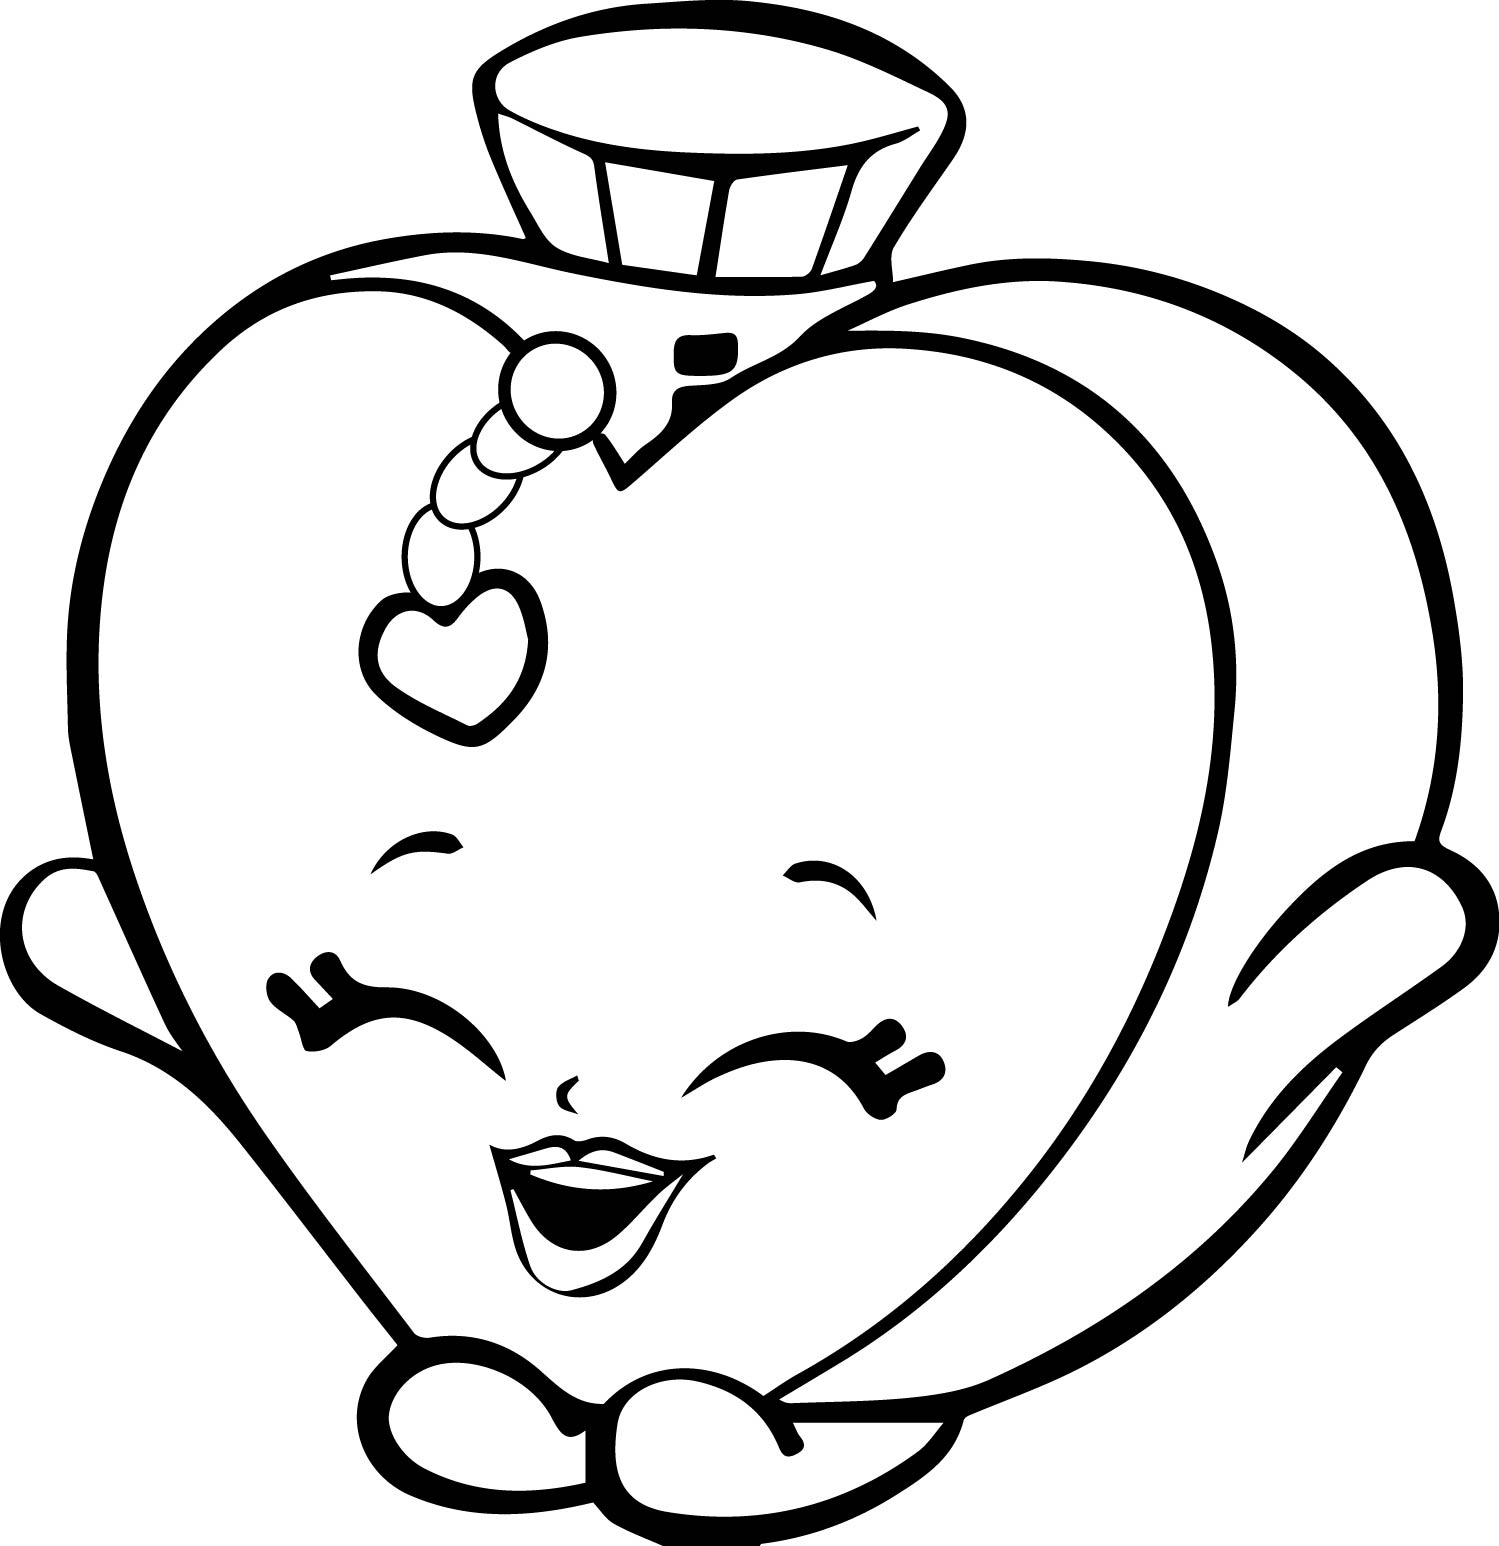 Shopkins Coloring Pages   Best Coloring Pages For Kids